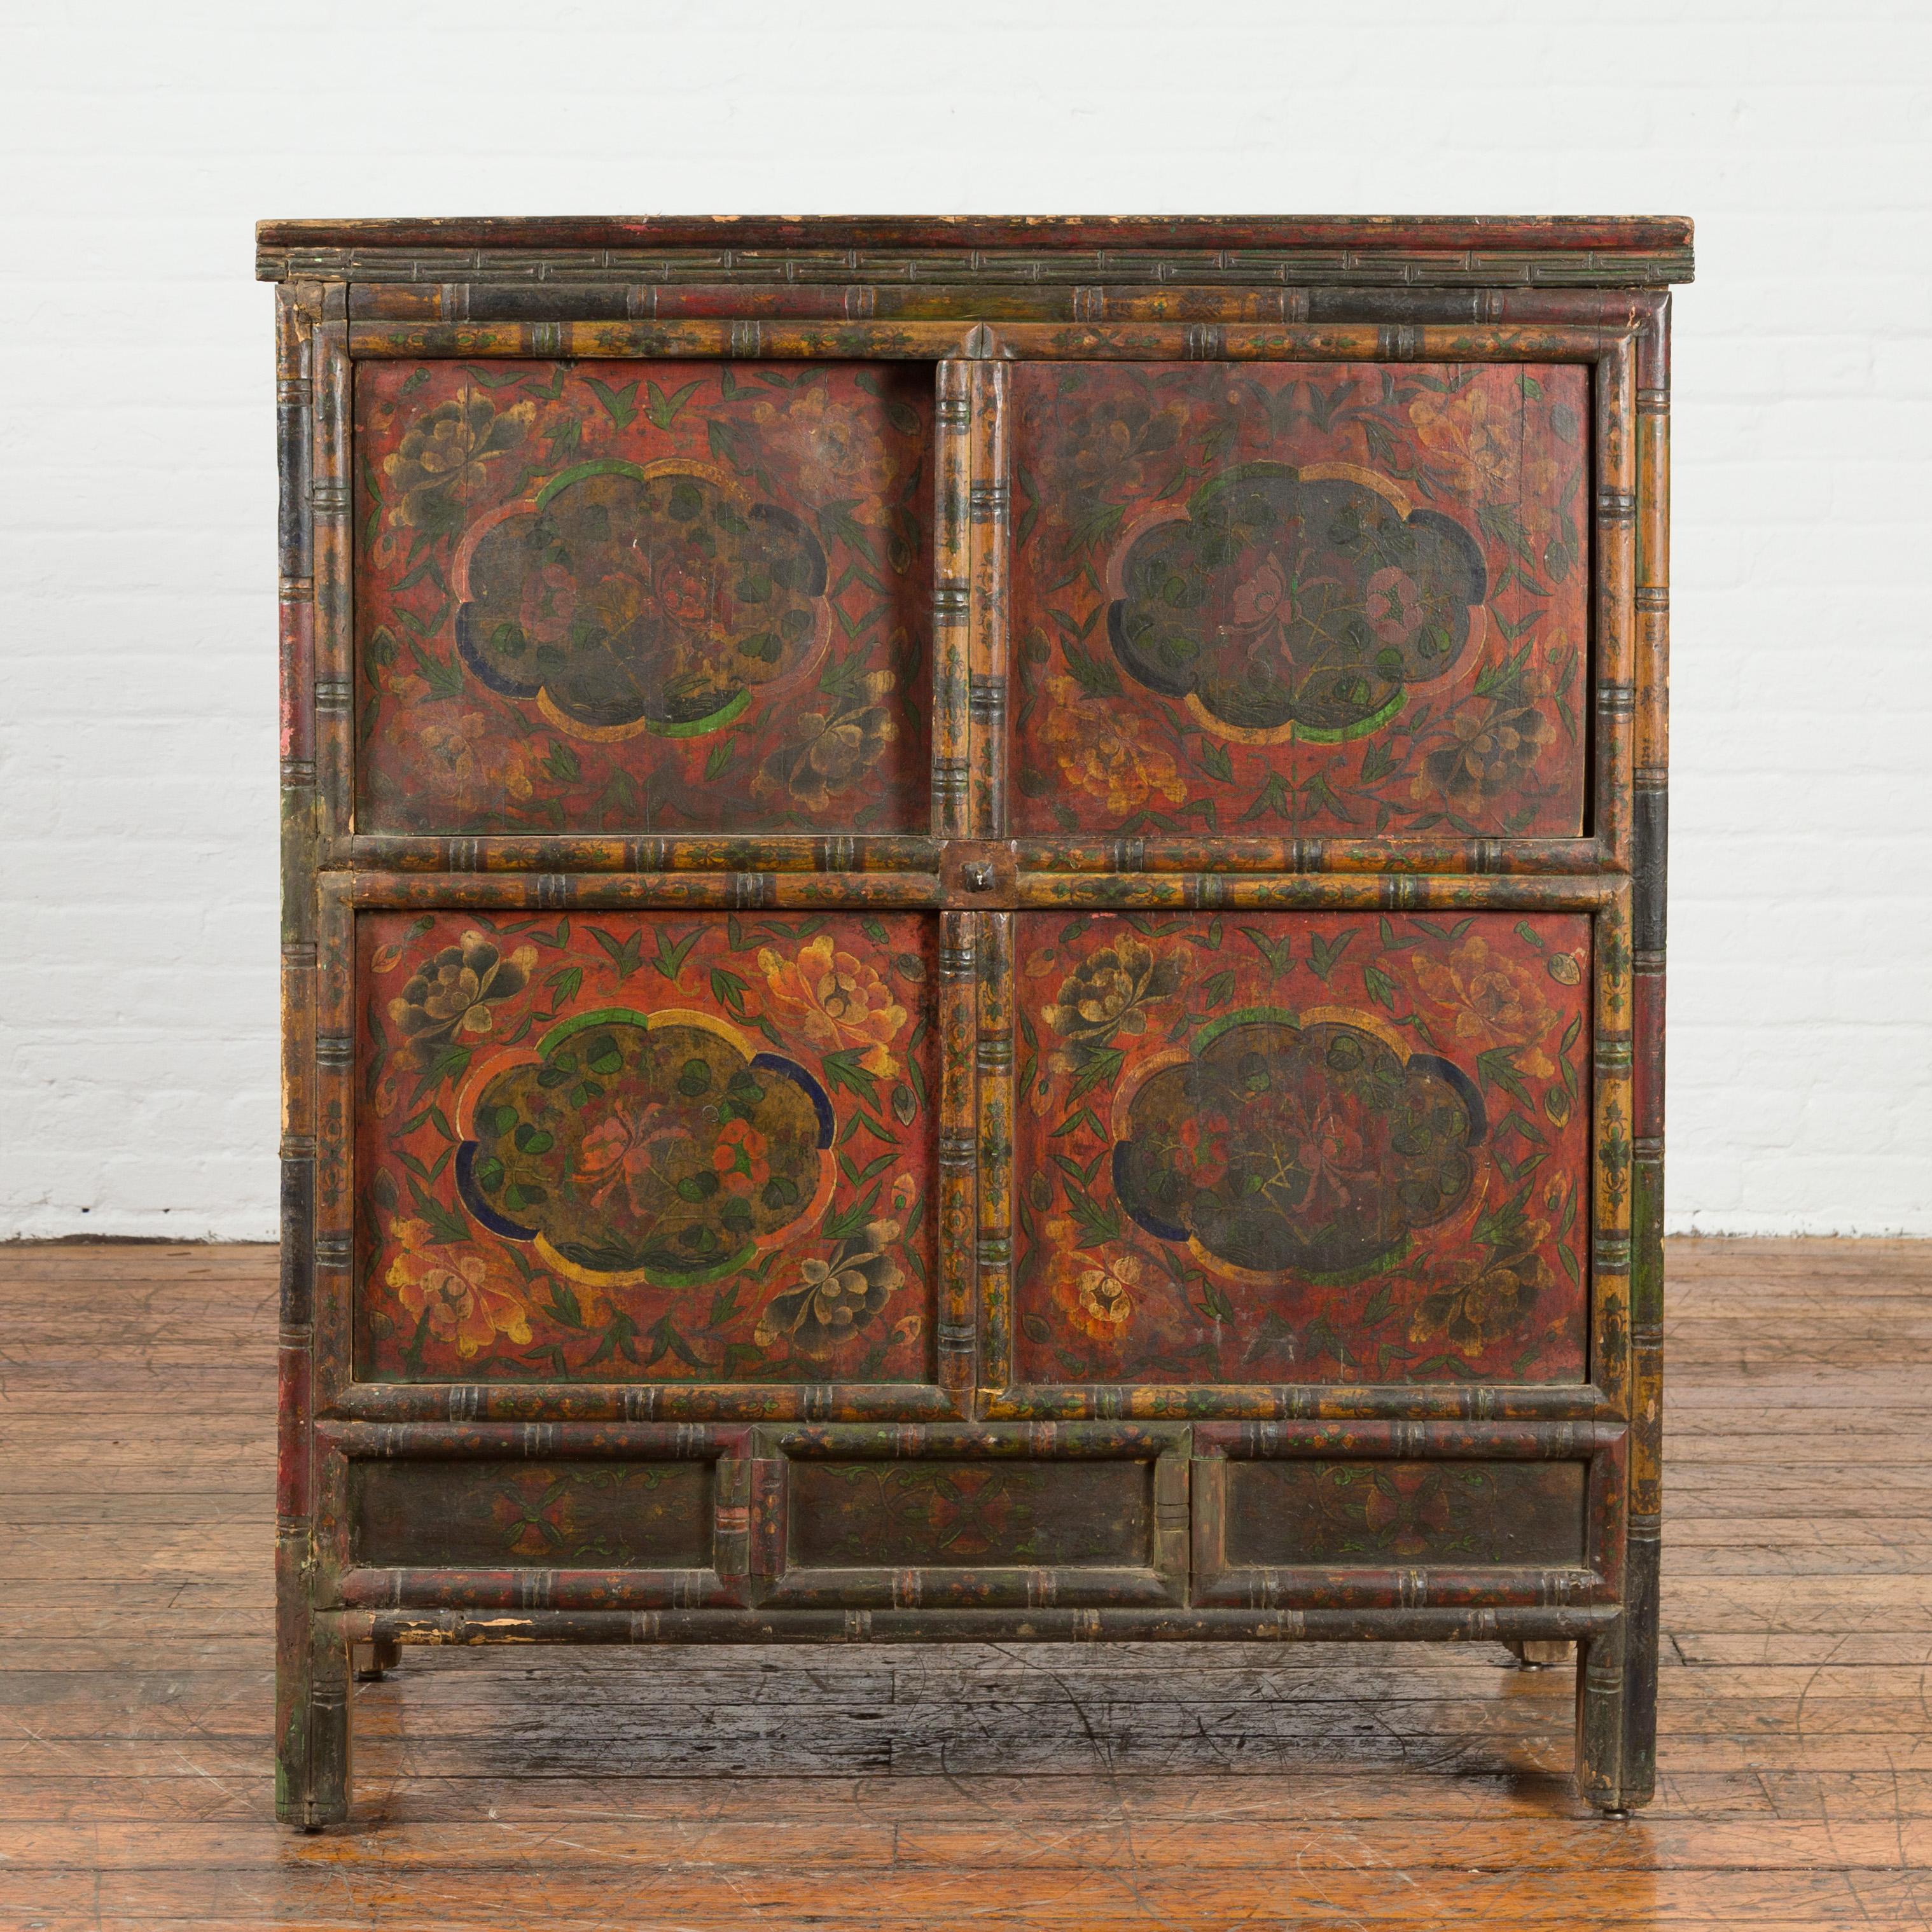 A Tibetan antique cabinet from the 19th century, with painted cartouches and two pairs of double doors. Created in Tibet during the 19th century, this cabinet features a painted façade made of two pairs of double doors adorned with colorful